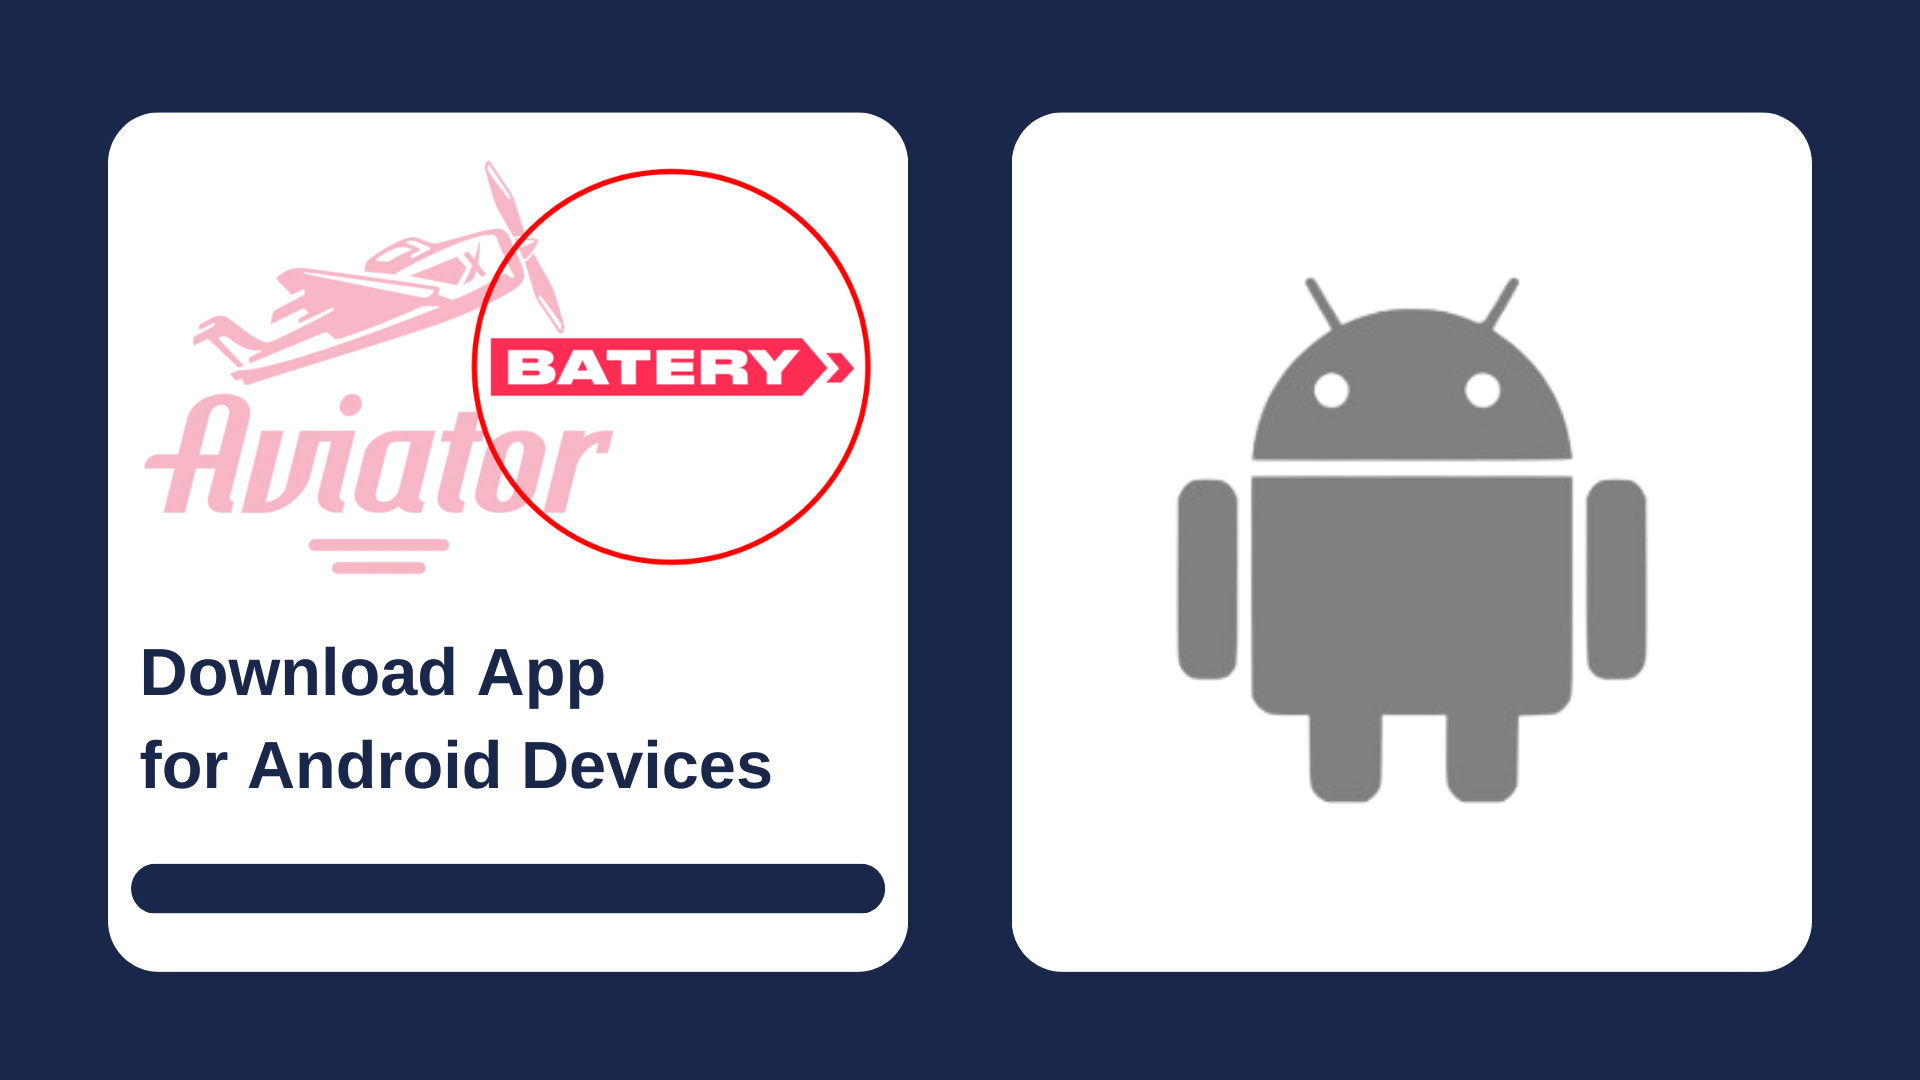 First picture showing Aviator and Batery logos with text, and second - Android icon